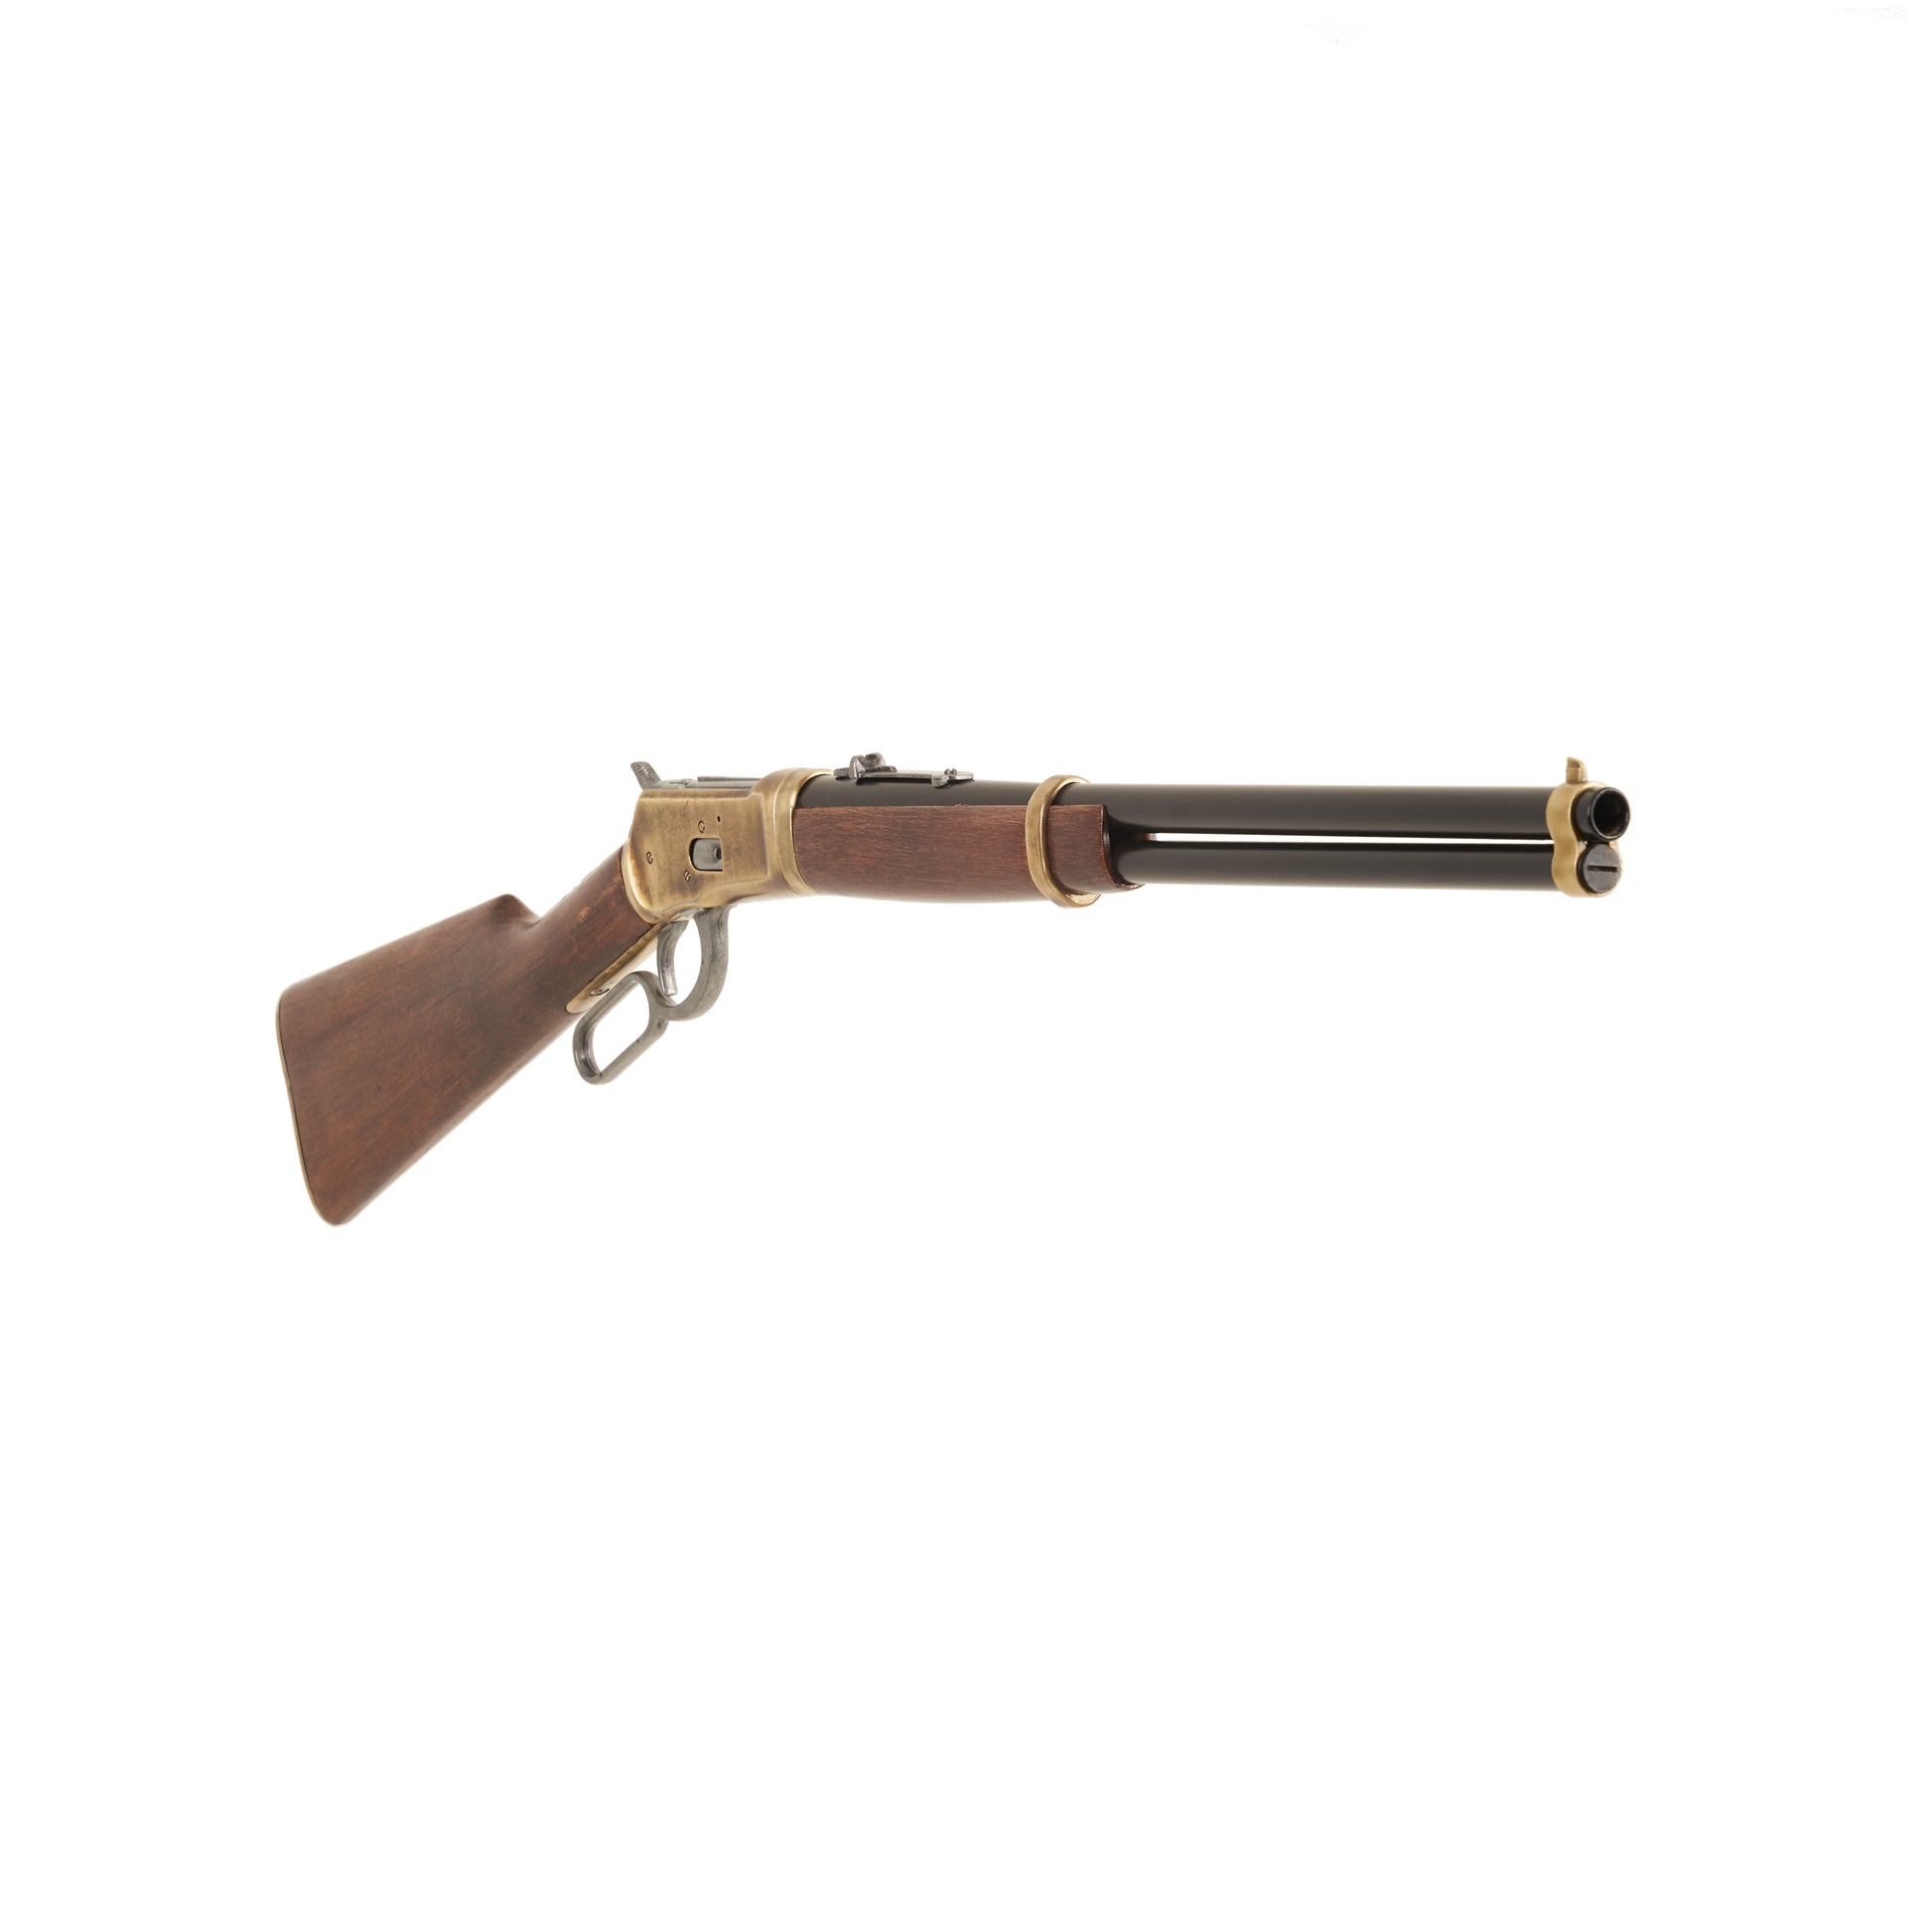 Front view of 1892 Old West Rifle with wooden stock, brass fittings and a black barrel